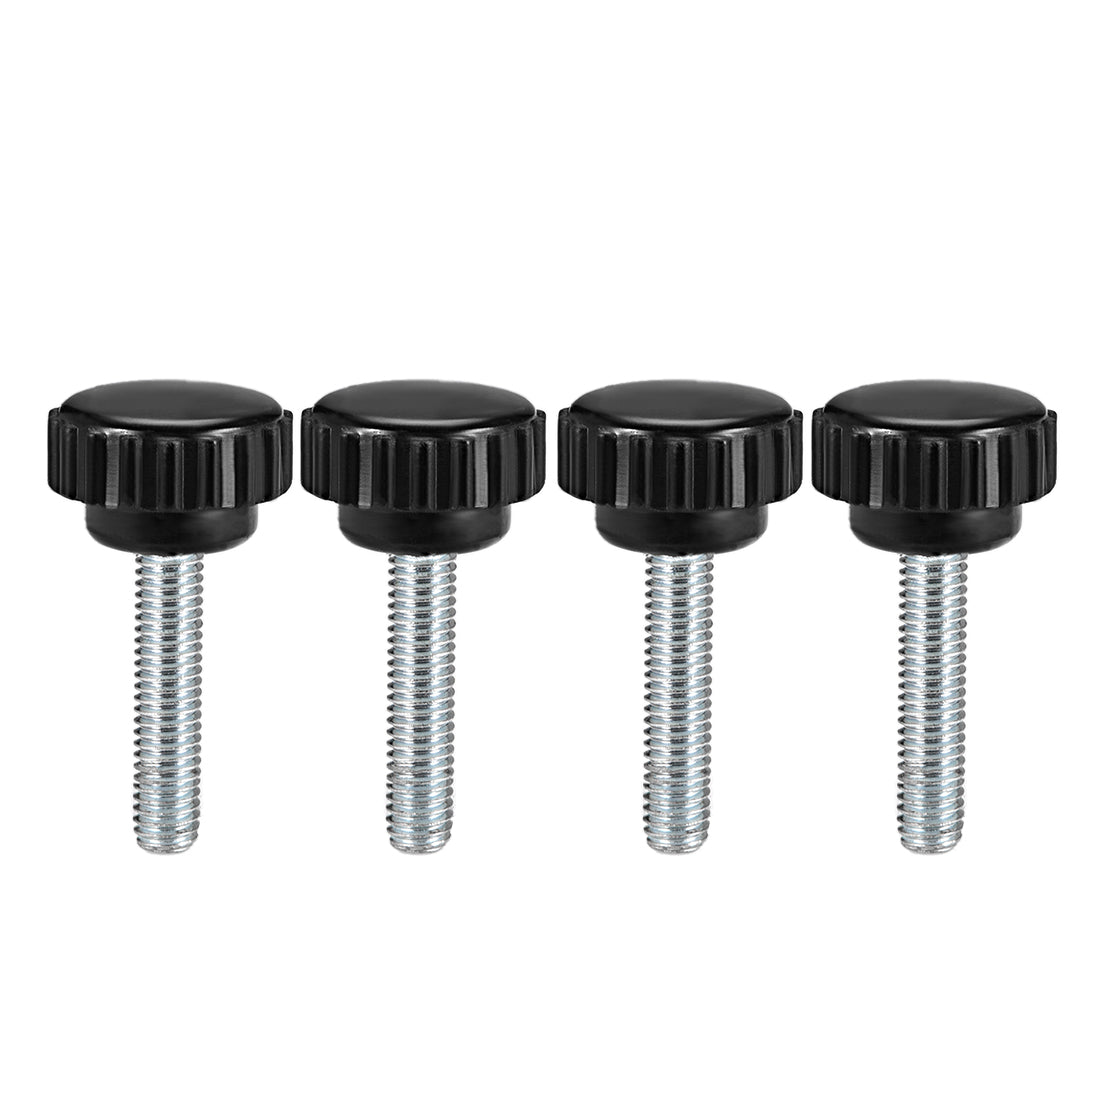 Uxcell Uxcell M6 x 44mm Male Thread Knurled Clamping Knobs Grip Thumb Screw on Type 4 Pcs